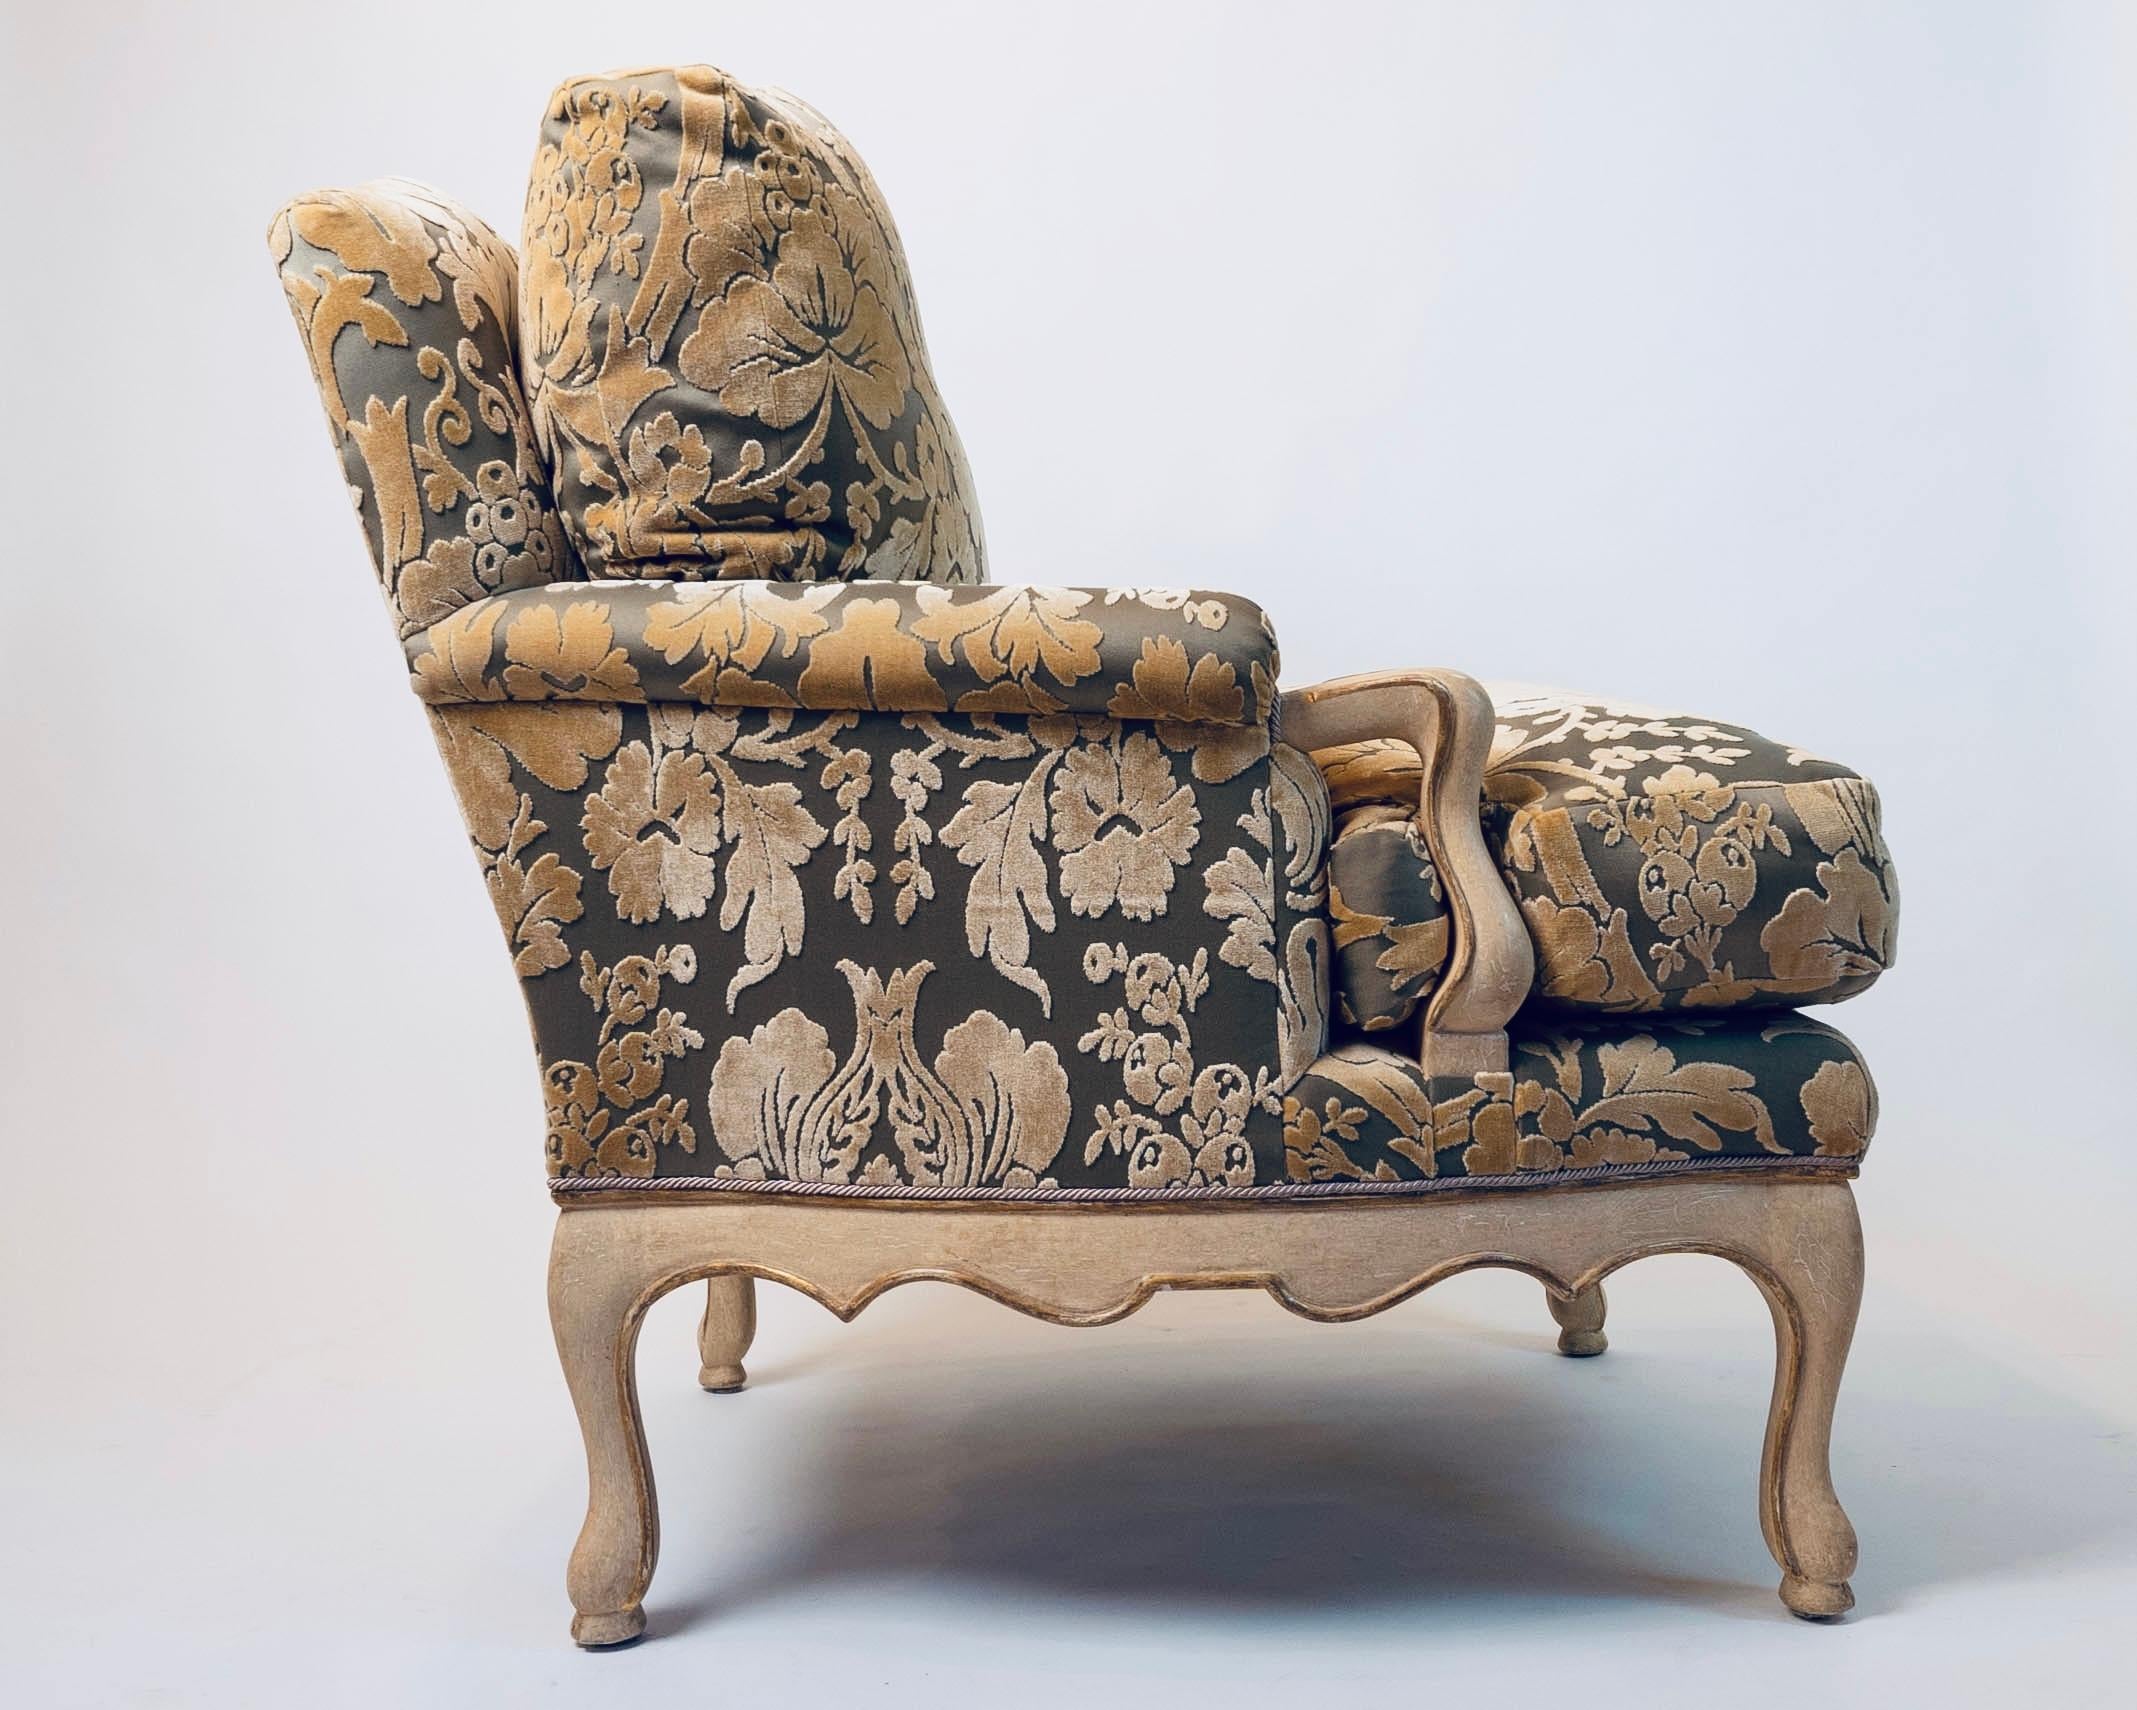 Sumptuous pair of oversized bergere chairs upholstered in a muted gray-green silk with soft gold velvet upholstery. The regal club chairs are in a French Country style by designer F. Robert Scott, having down filled seat cushions and cream painted